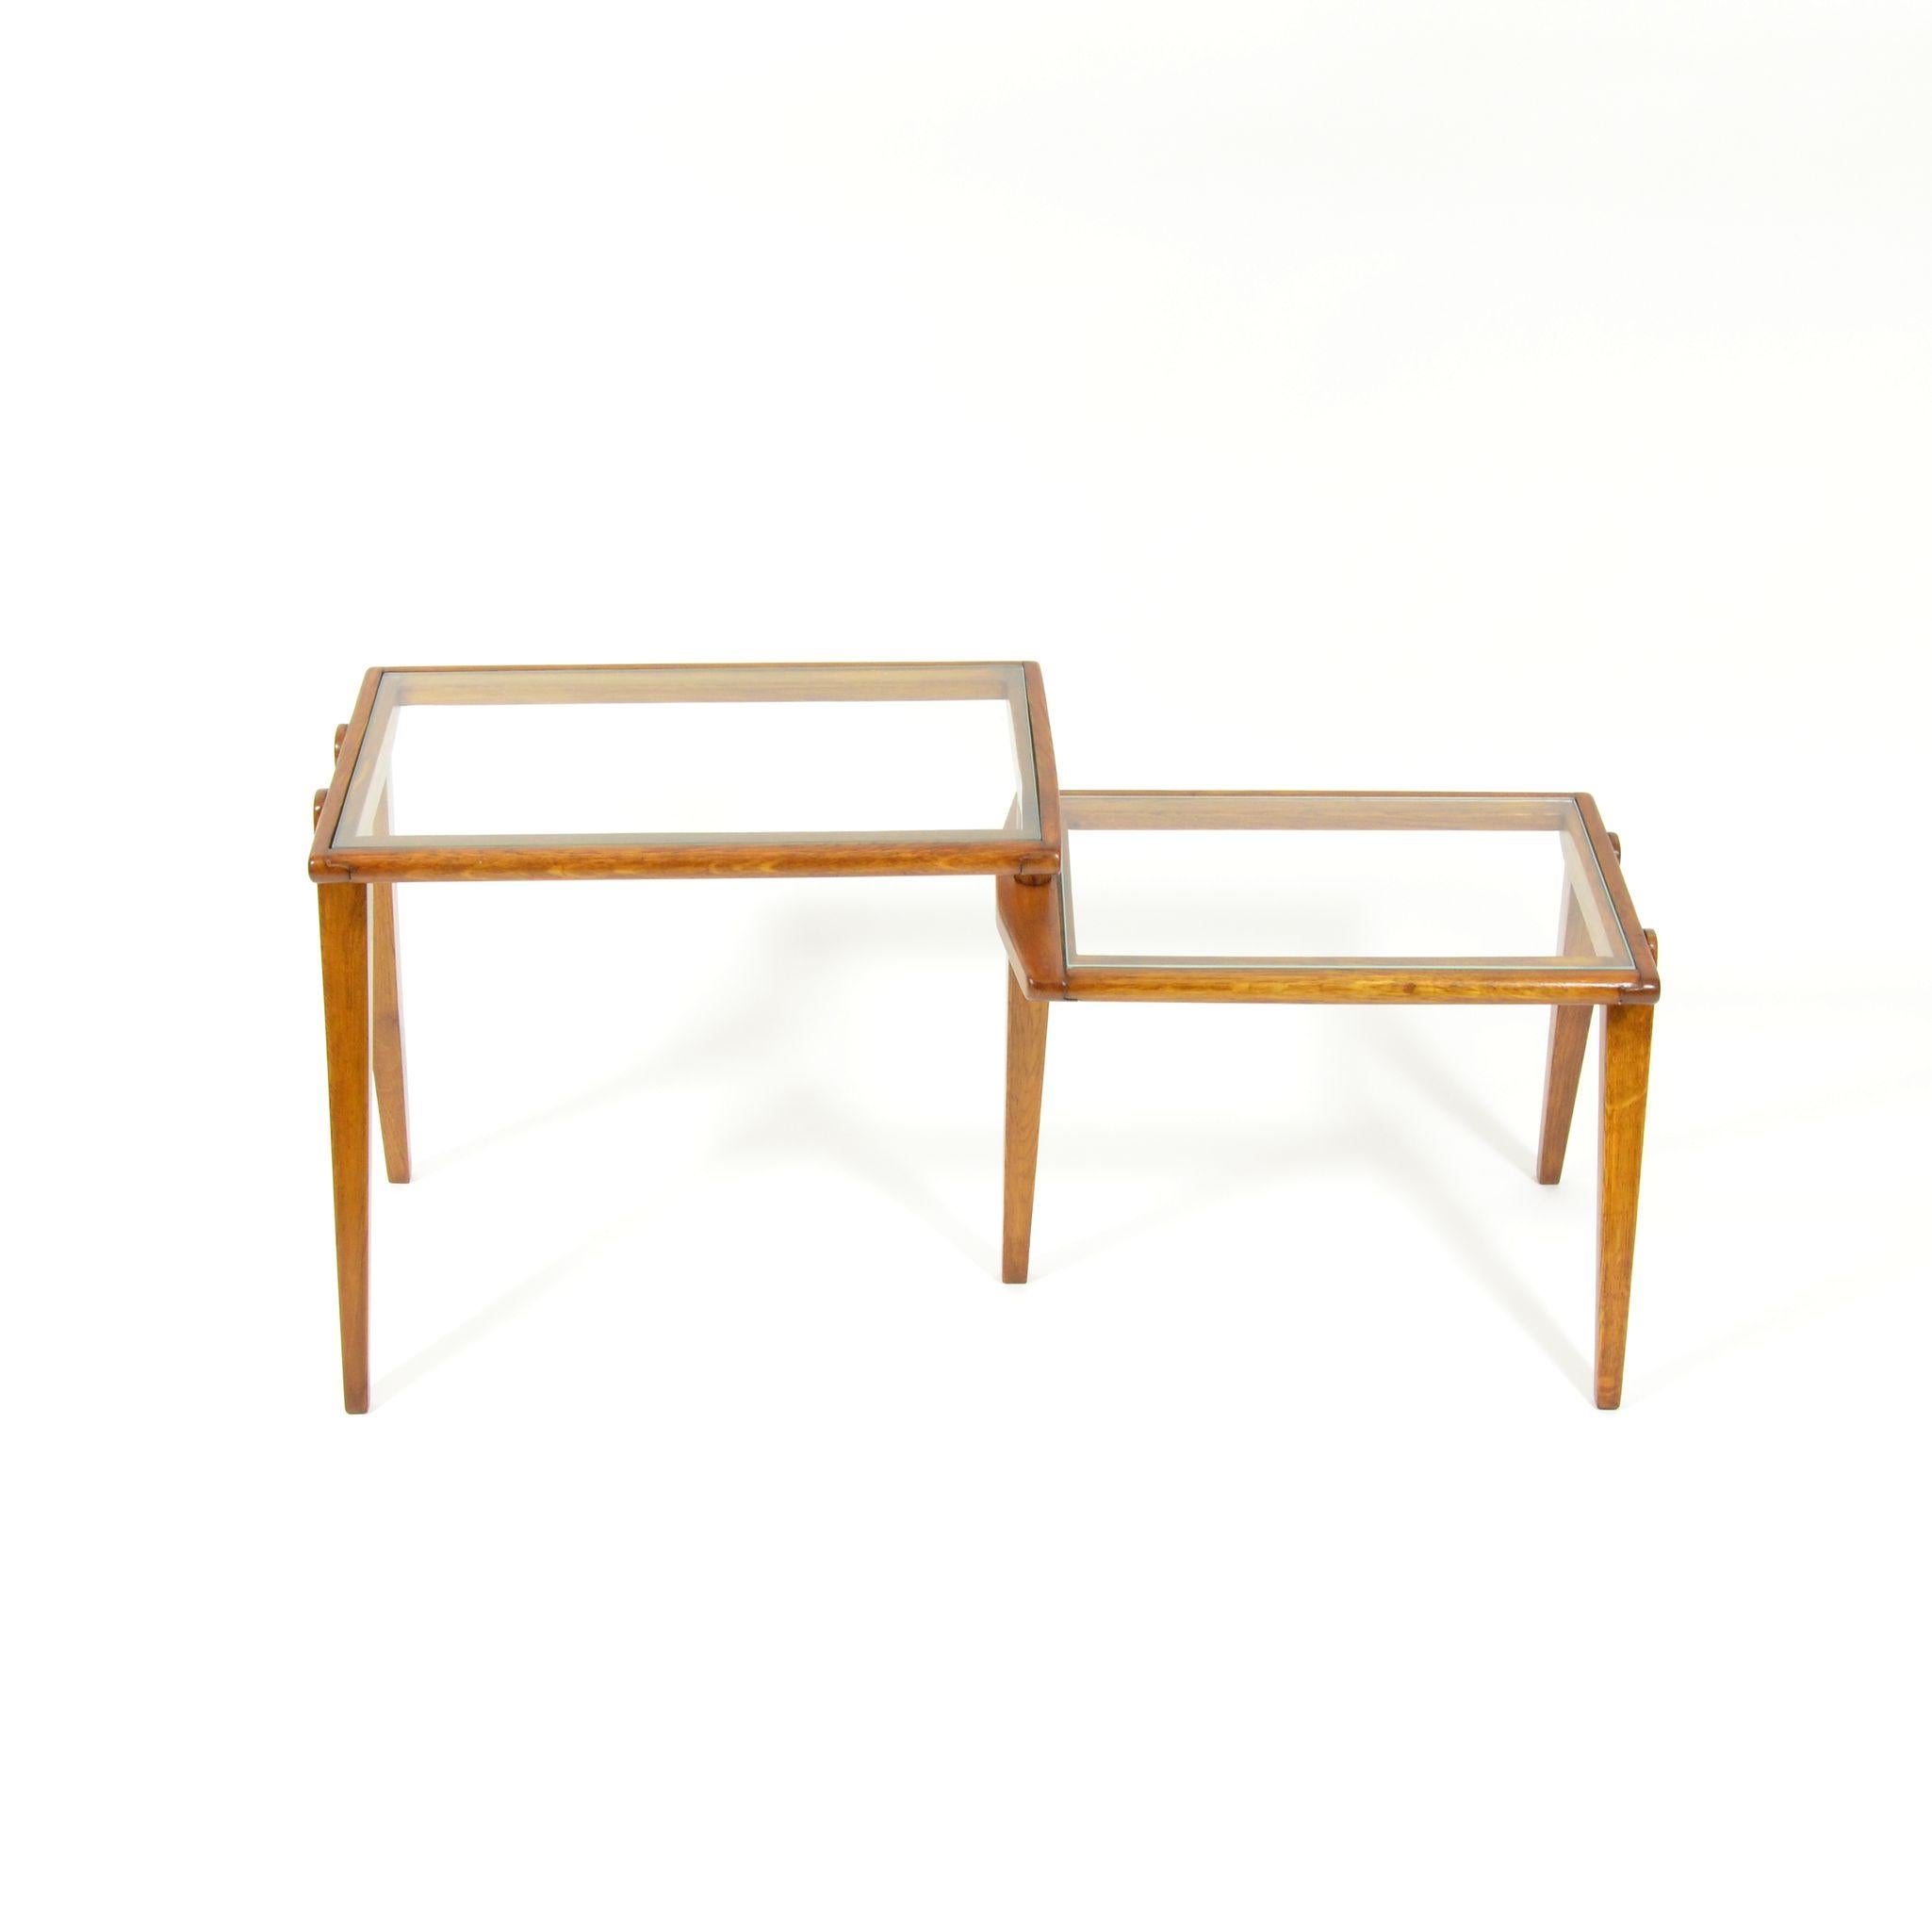 Mid-20th Century Folding Side Table, Wood and Glass, Czechoslovakia, 1960s